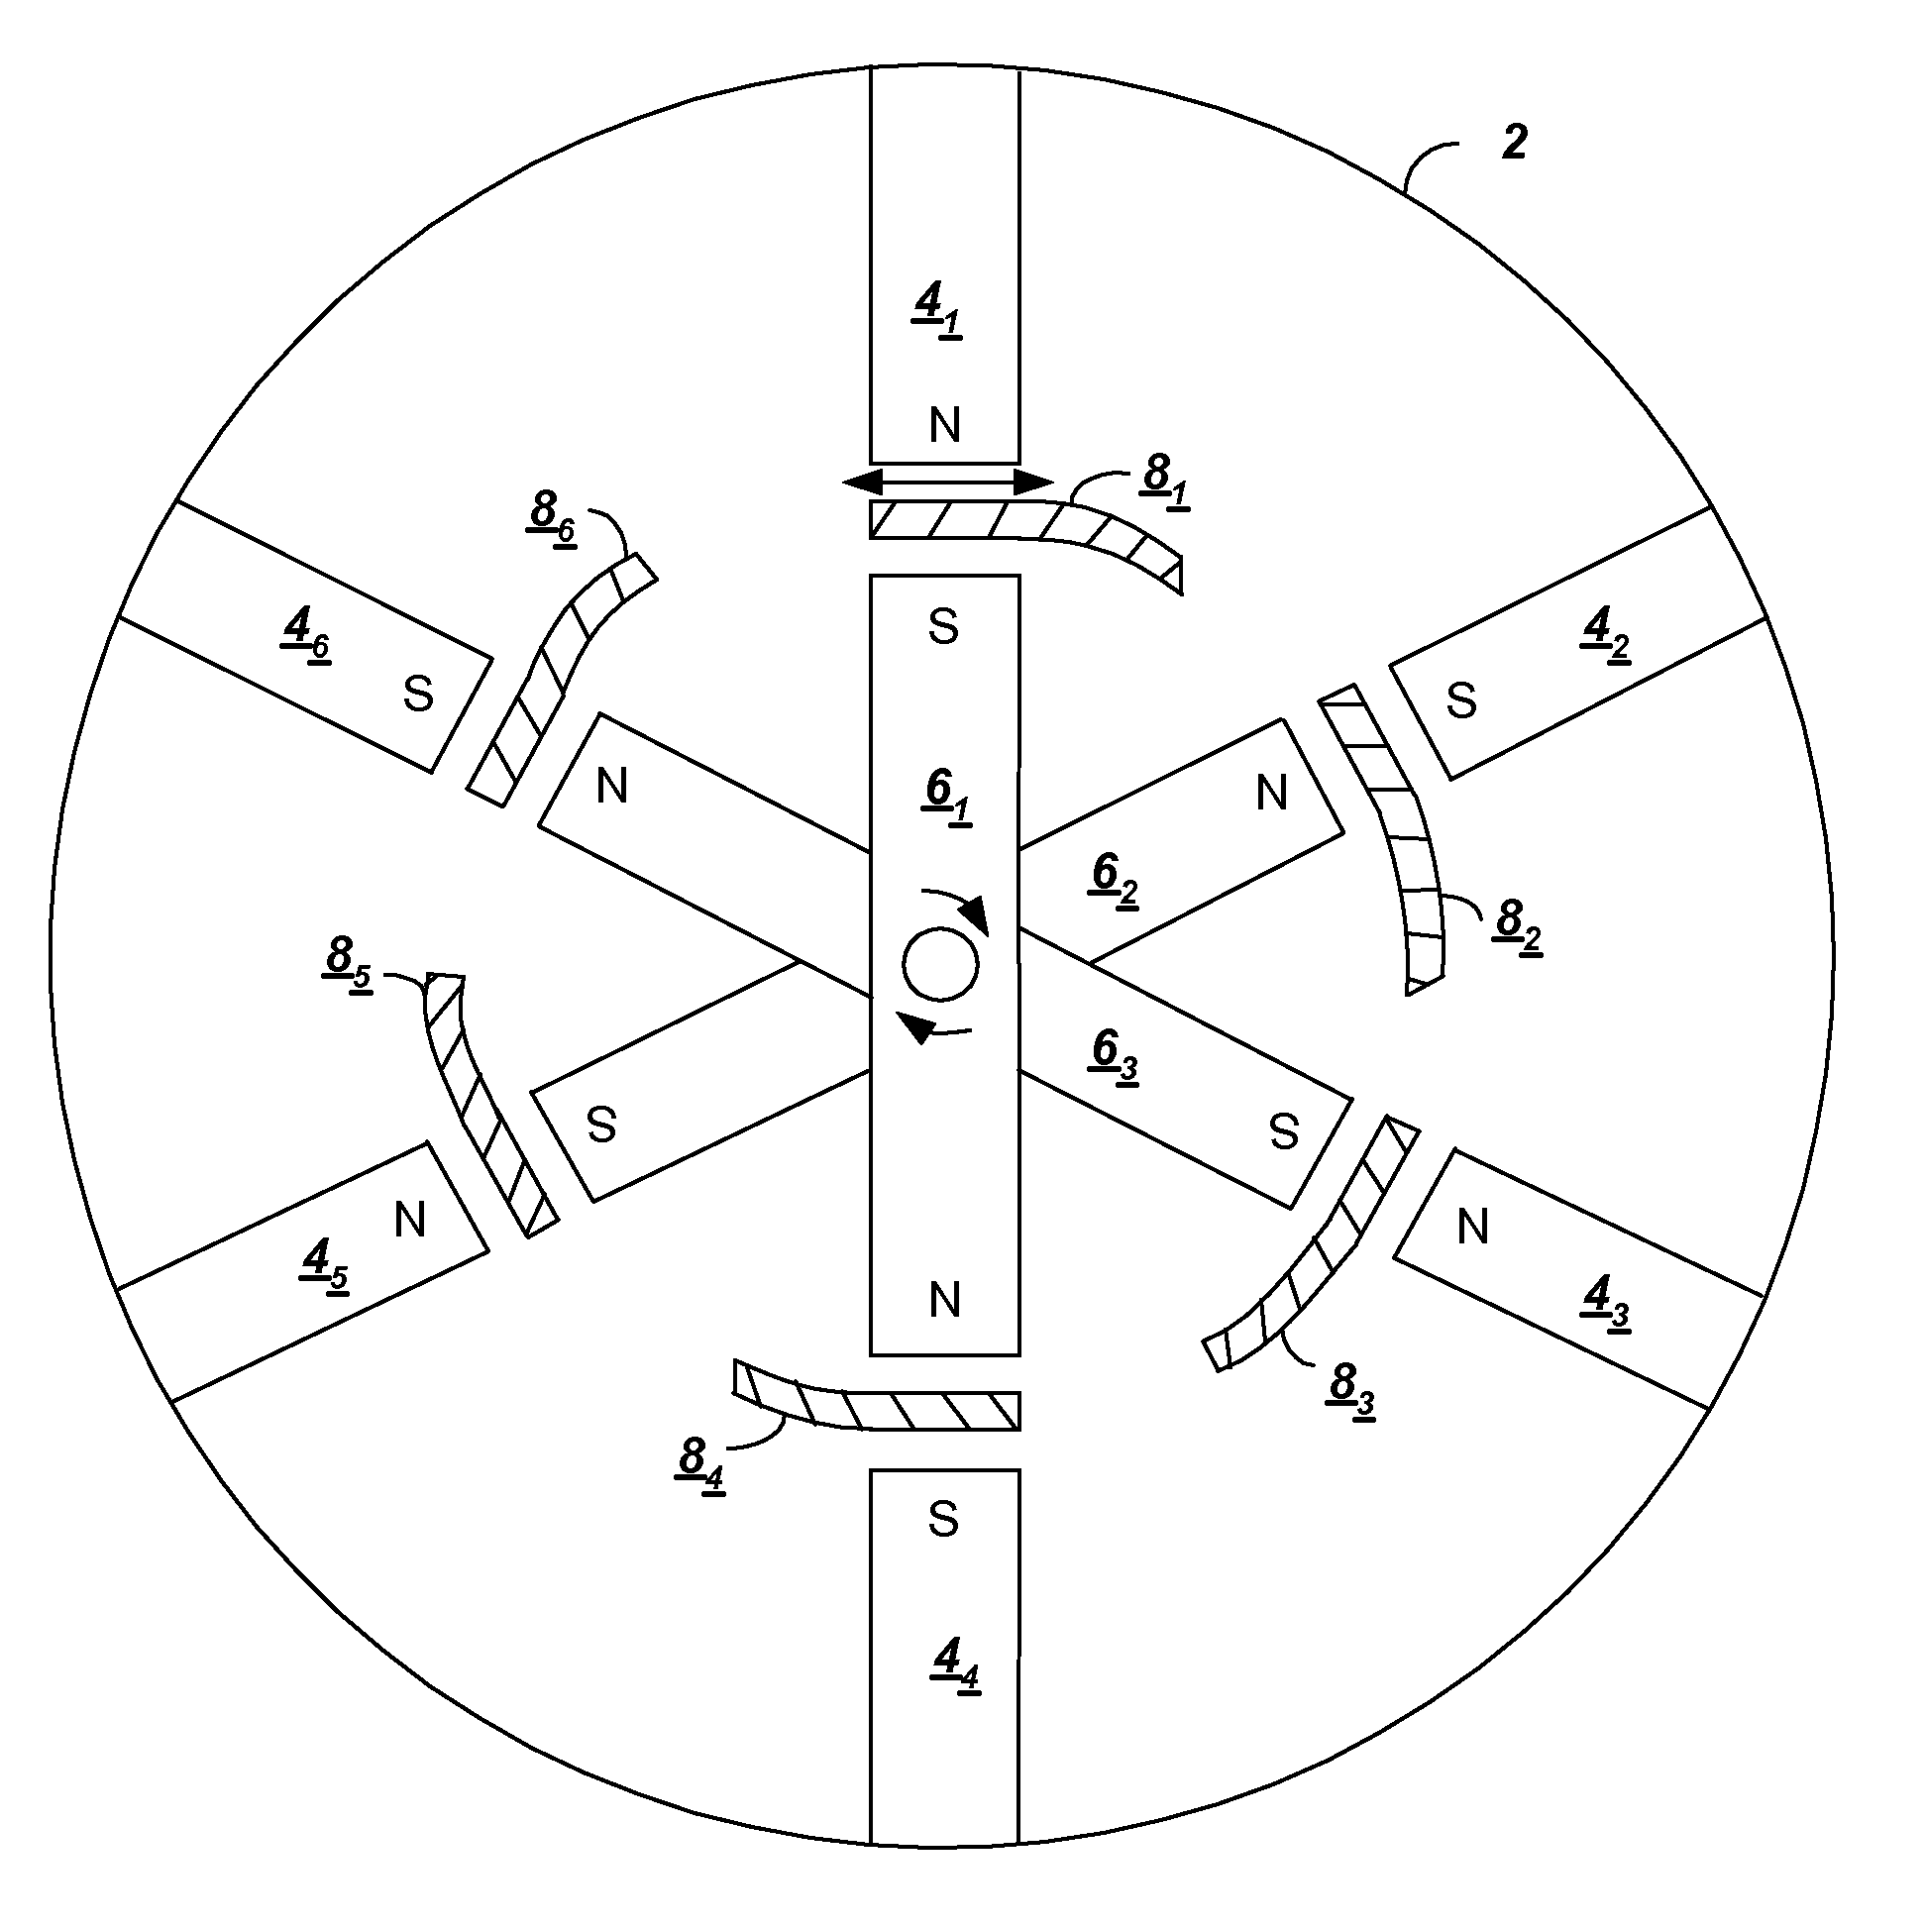 Mass magnifier using magnetic fields and mu-metal to provide an energy storage flywheel for use in conventional, microtechnology, and nanotechnology engines